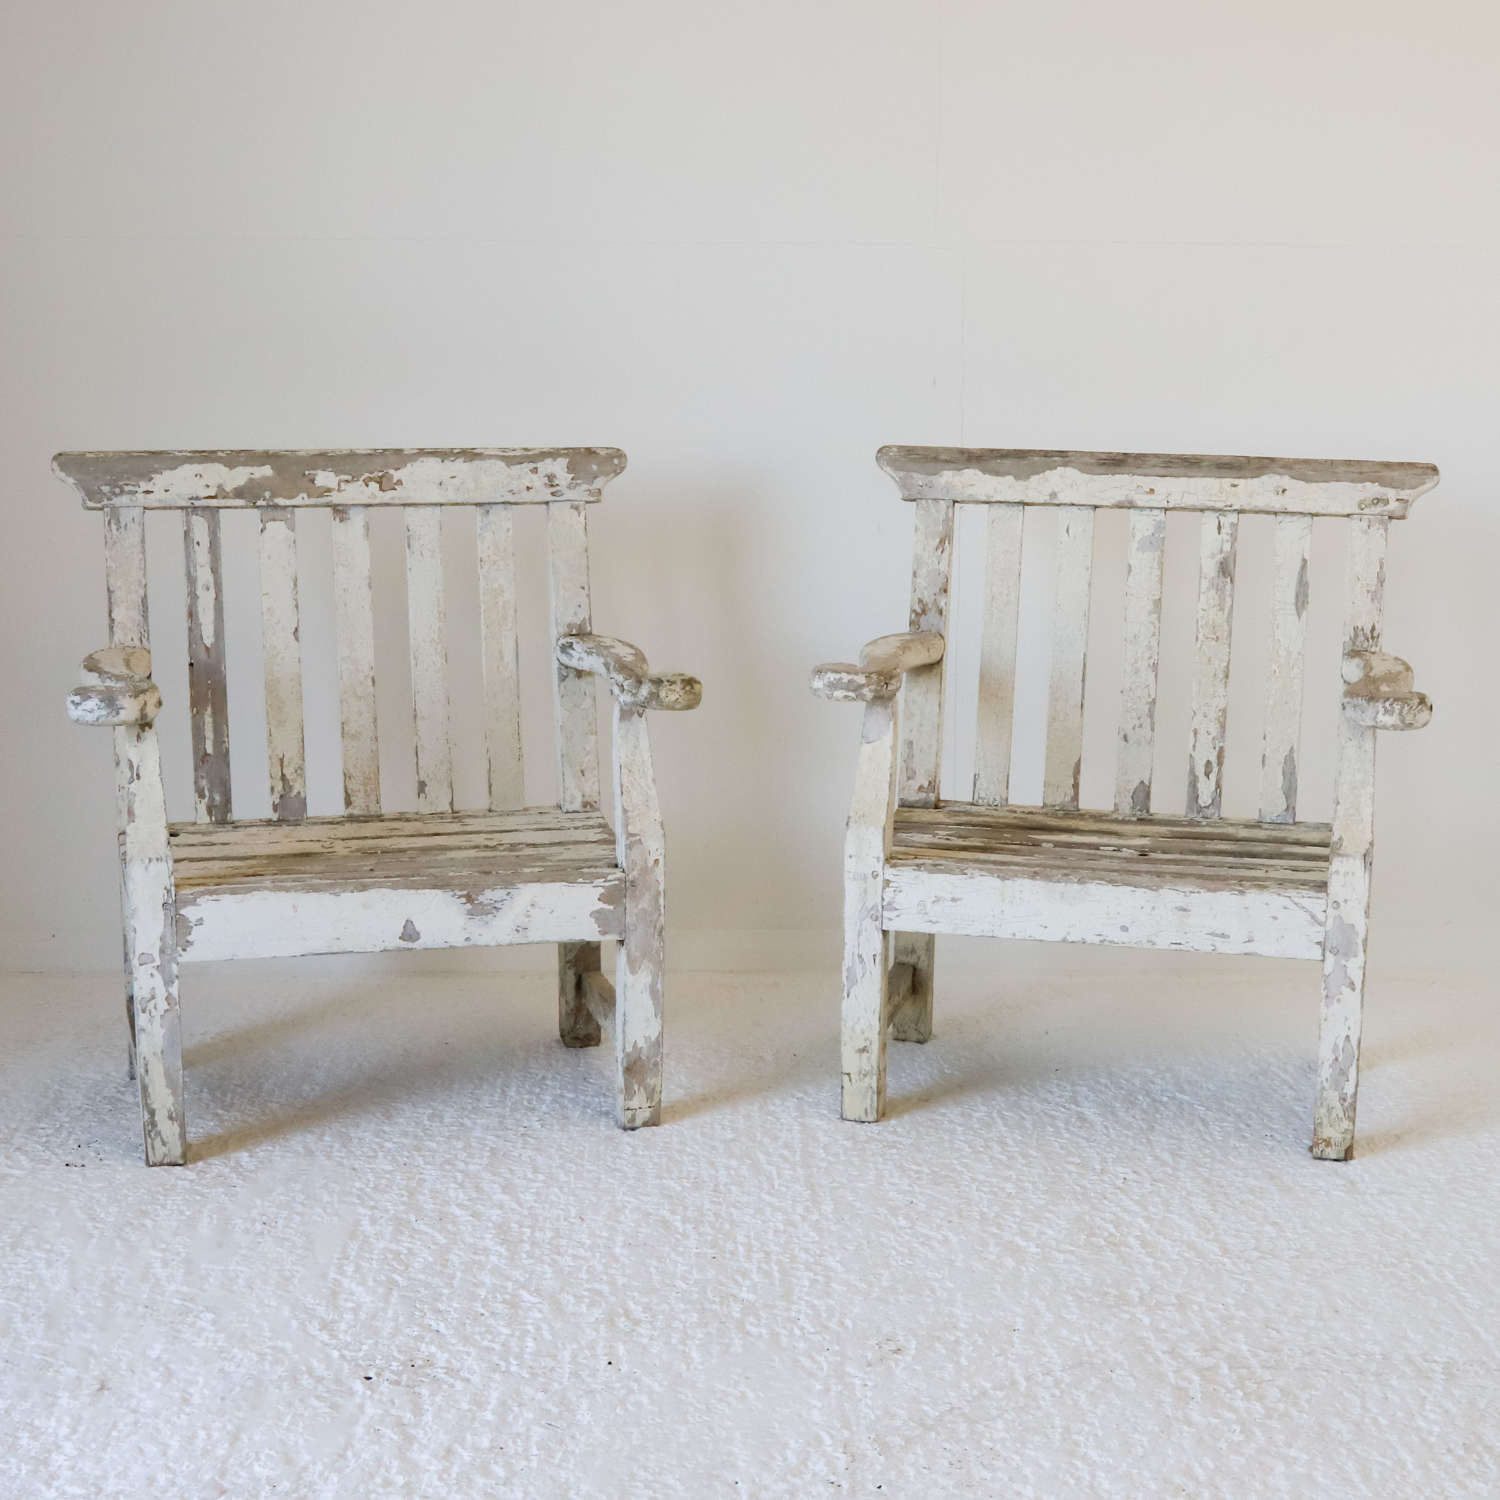 Pair of English 20th century oversize form wooden garden chairs